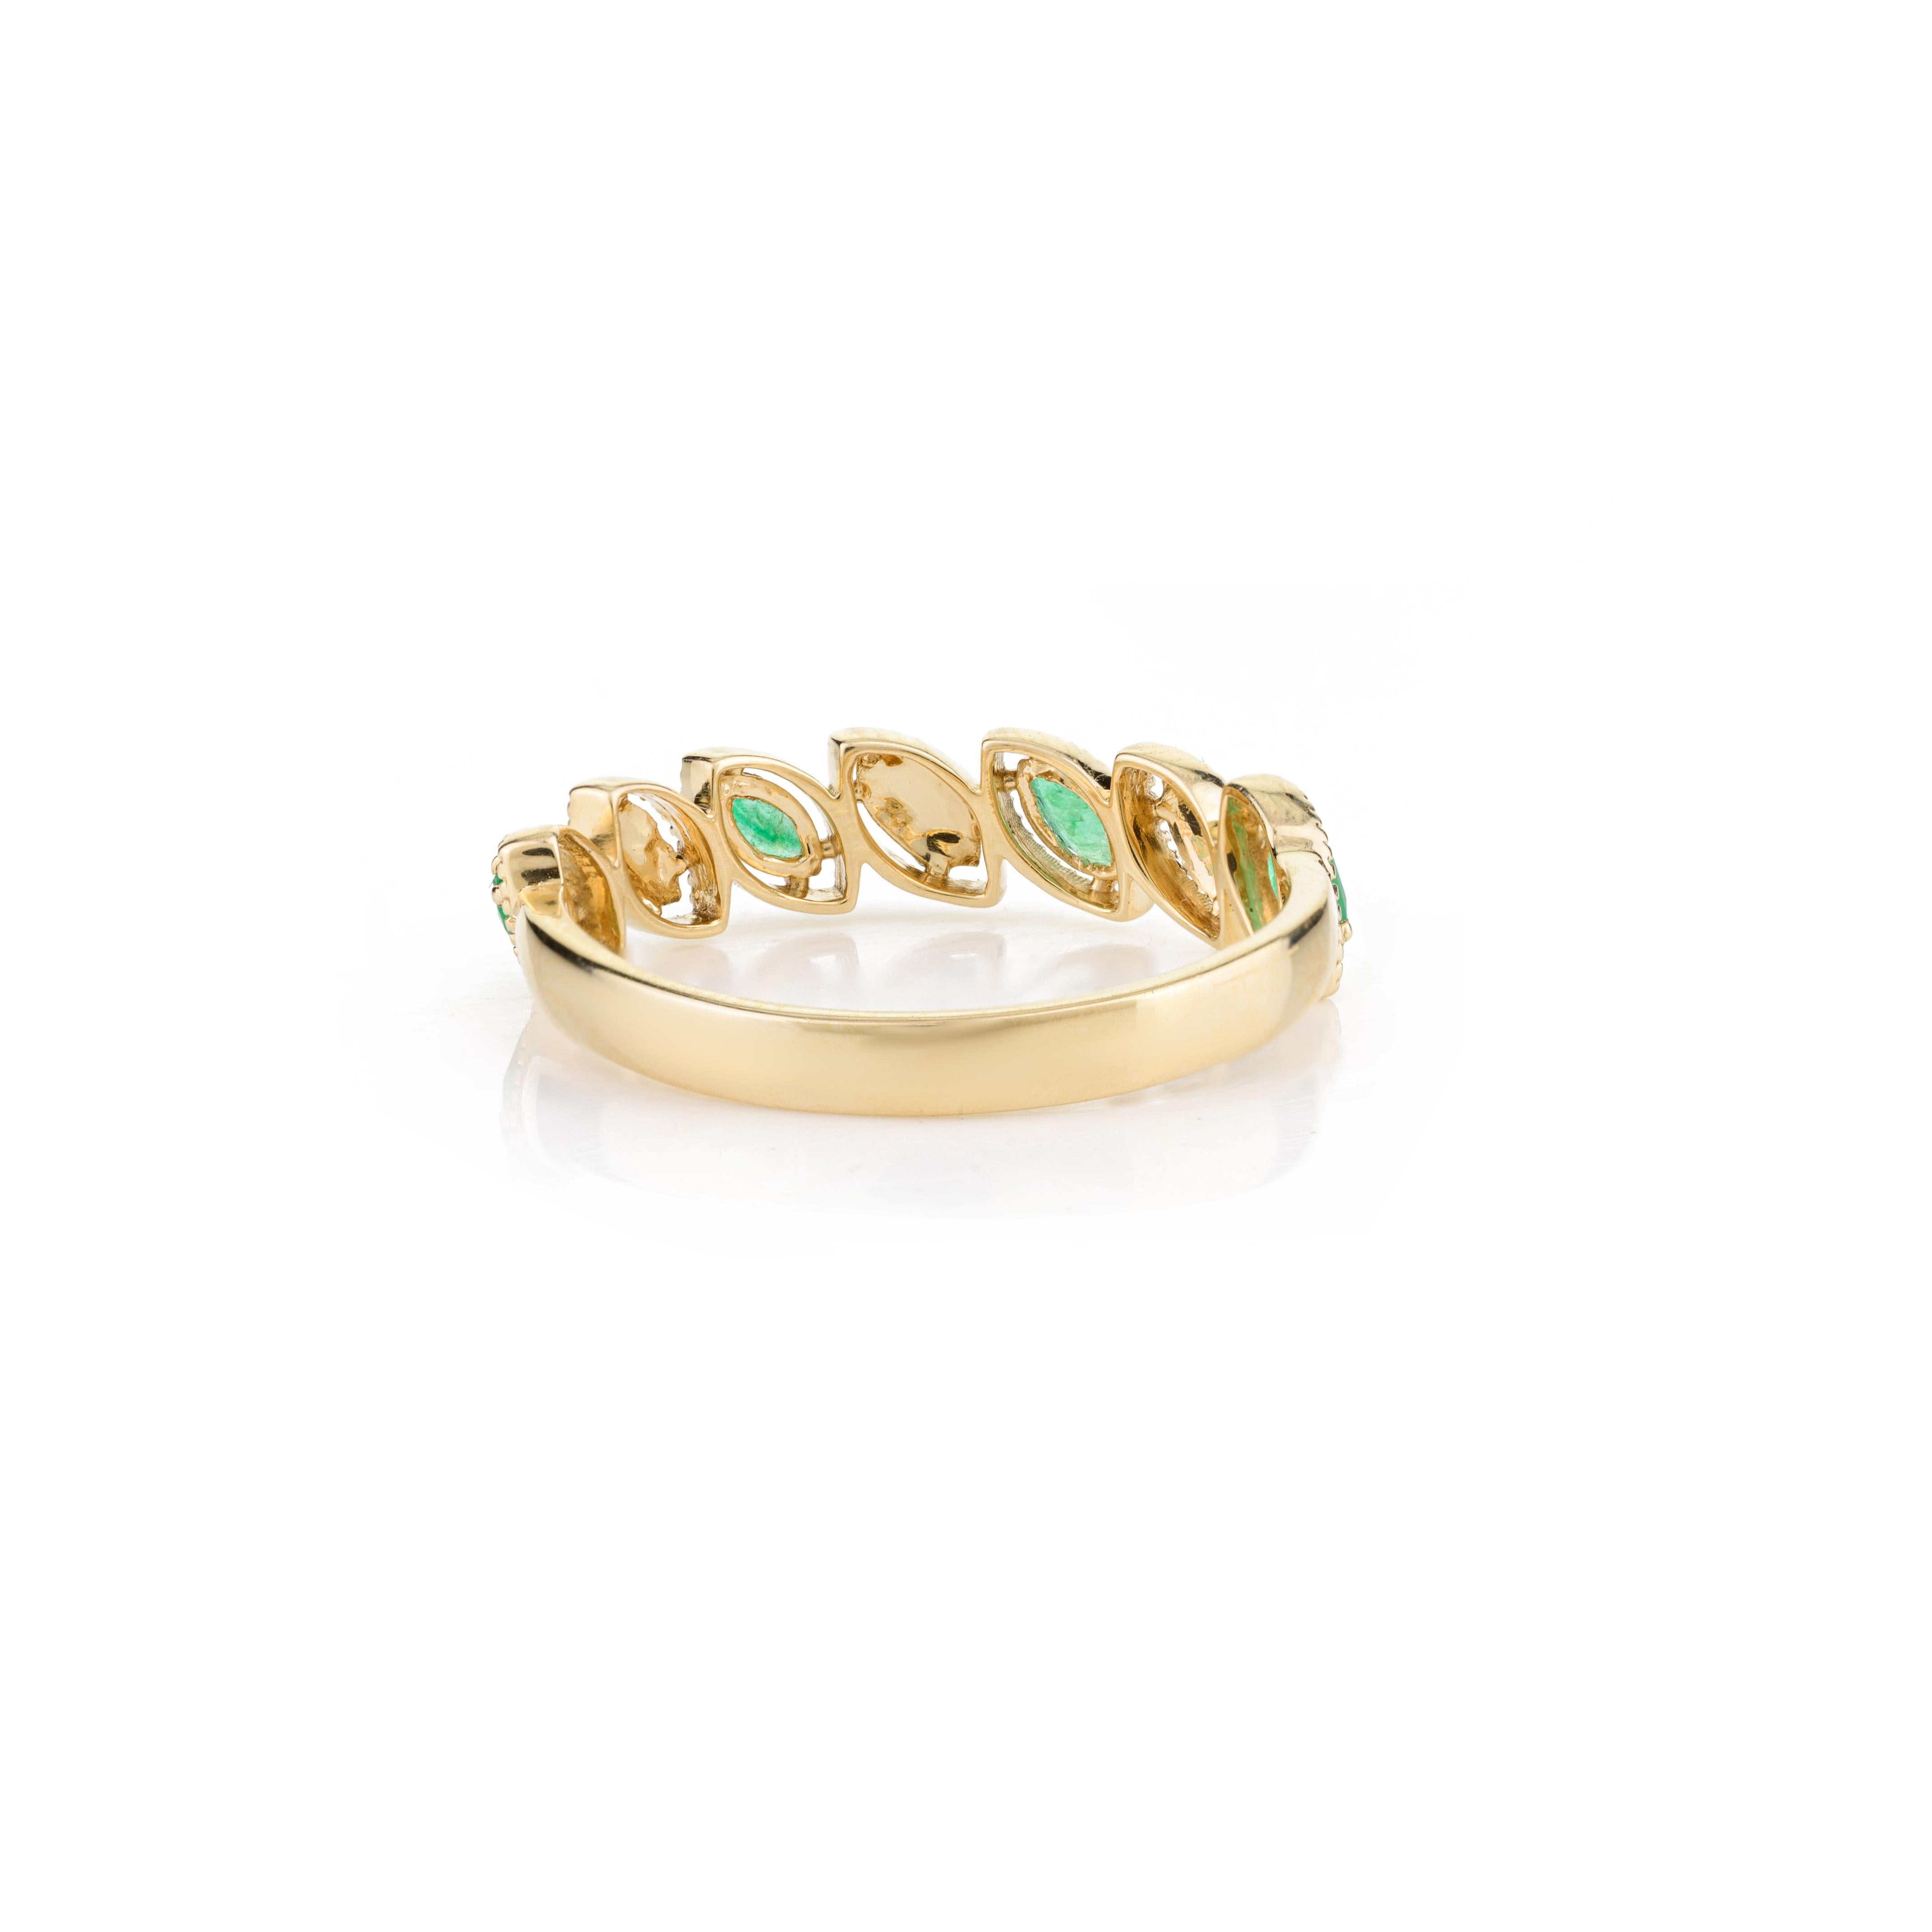 For Sale:  Delicate Emerald Birthstone Wedding Band Ring for Women in 14k Solid Yellow Gold 9